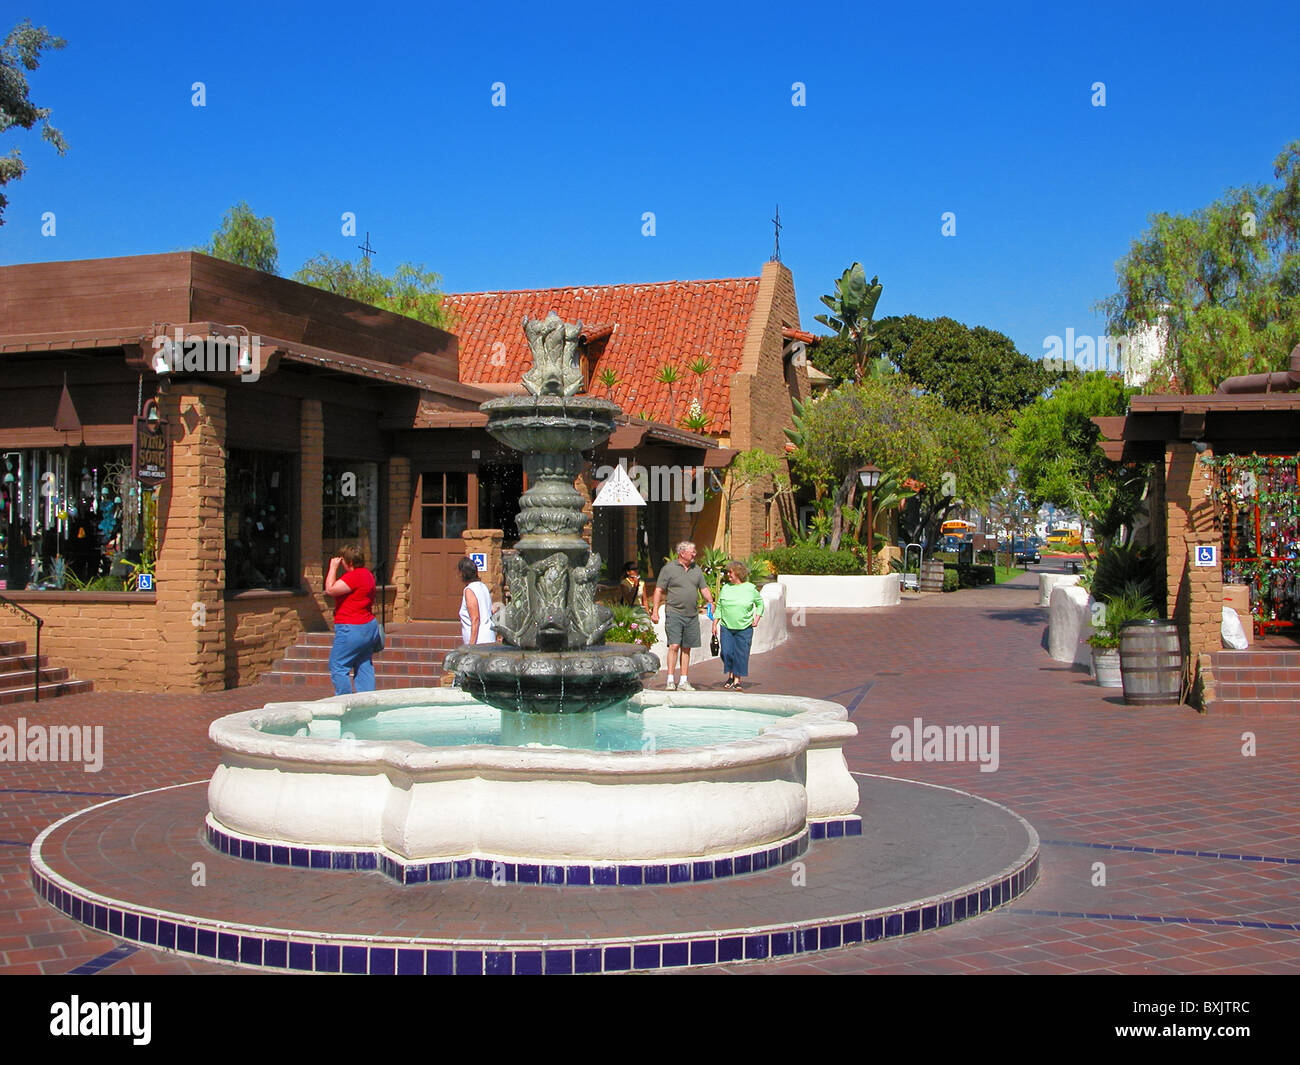 The fountain on the center square of the Seaport Village in San Diego, California, USA. Stock Photo